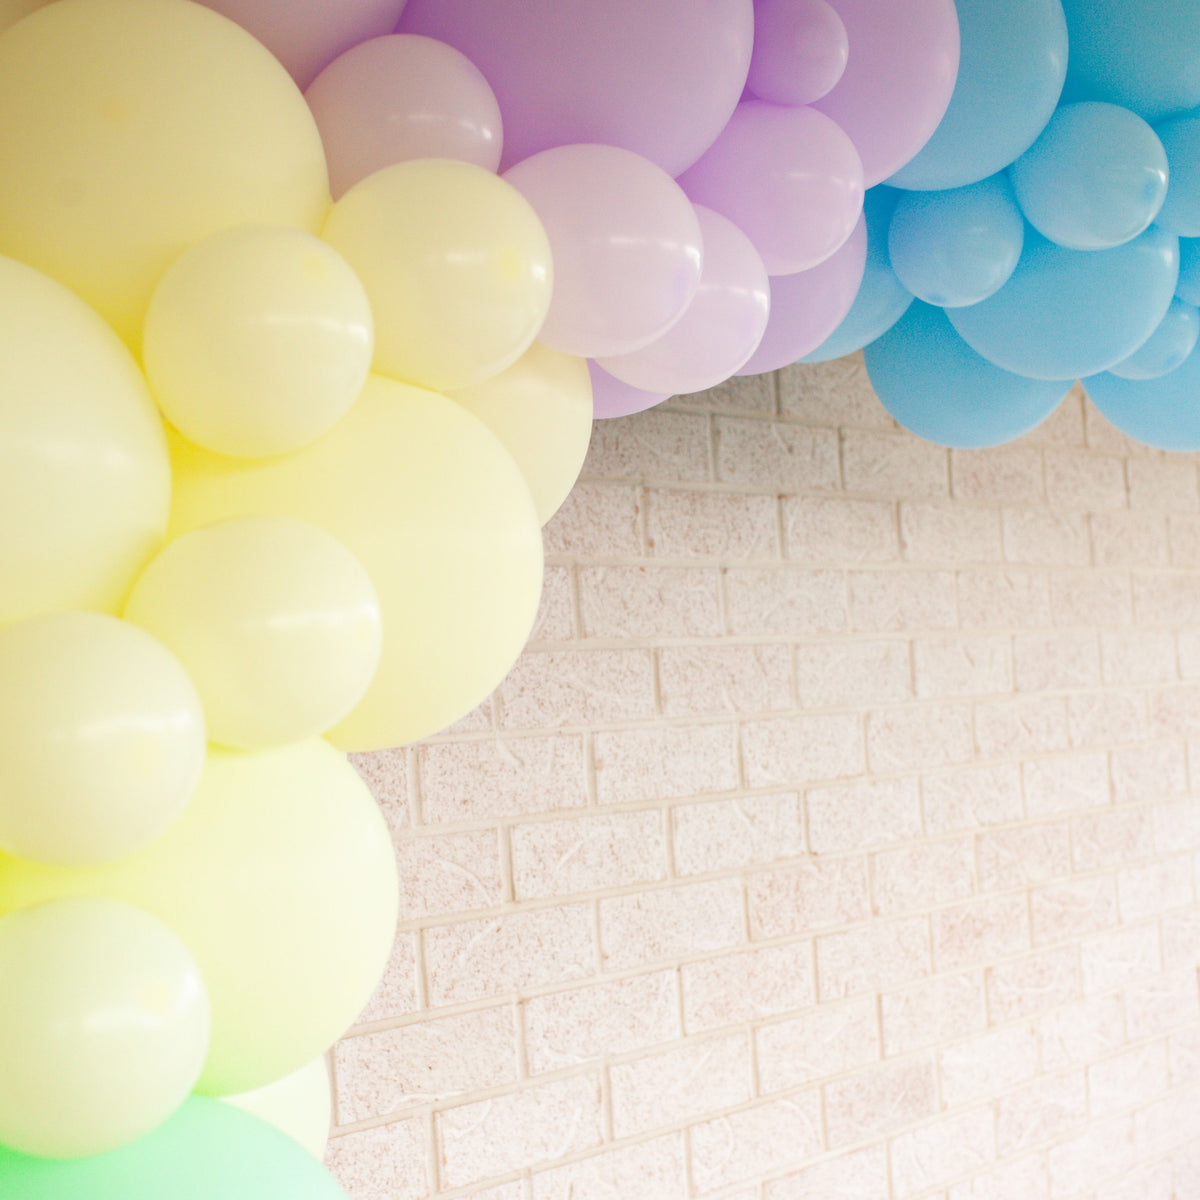 How to use Balloon Decorating Strip or Tape & Glue Pieces 